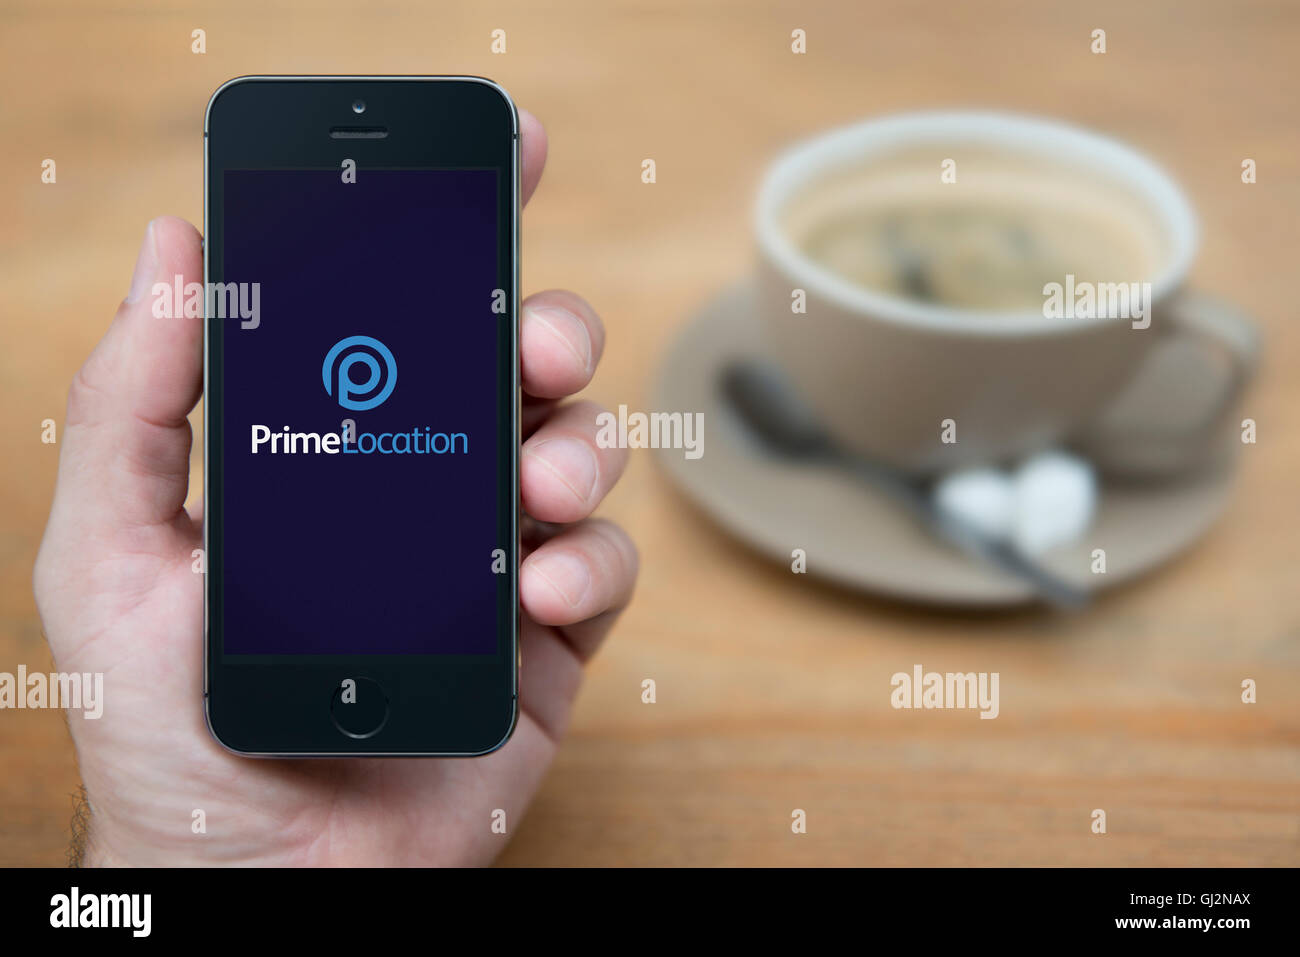 A man looks at his iPhone which displays the Prime Location logo, while sat with a cup of coffee (Editorial use only). Stock Photo